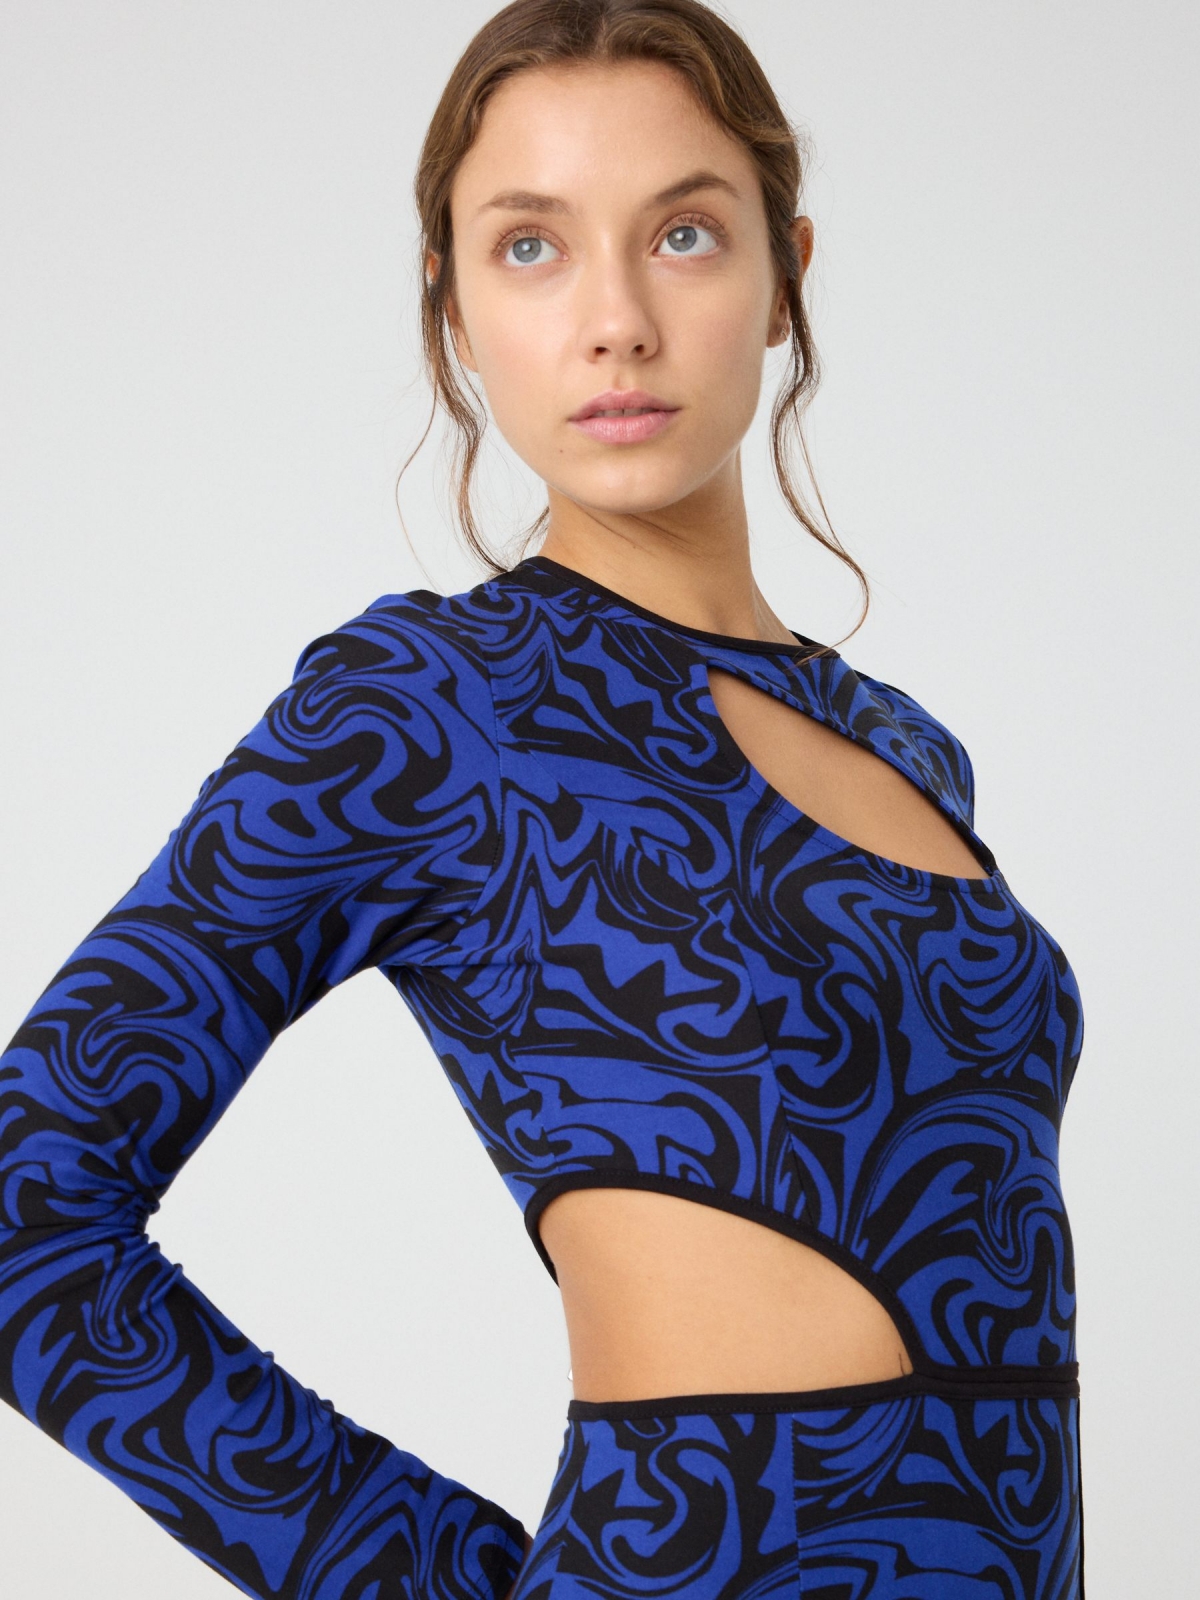 Psychedelic print cut out midi dress dark blue detail view